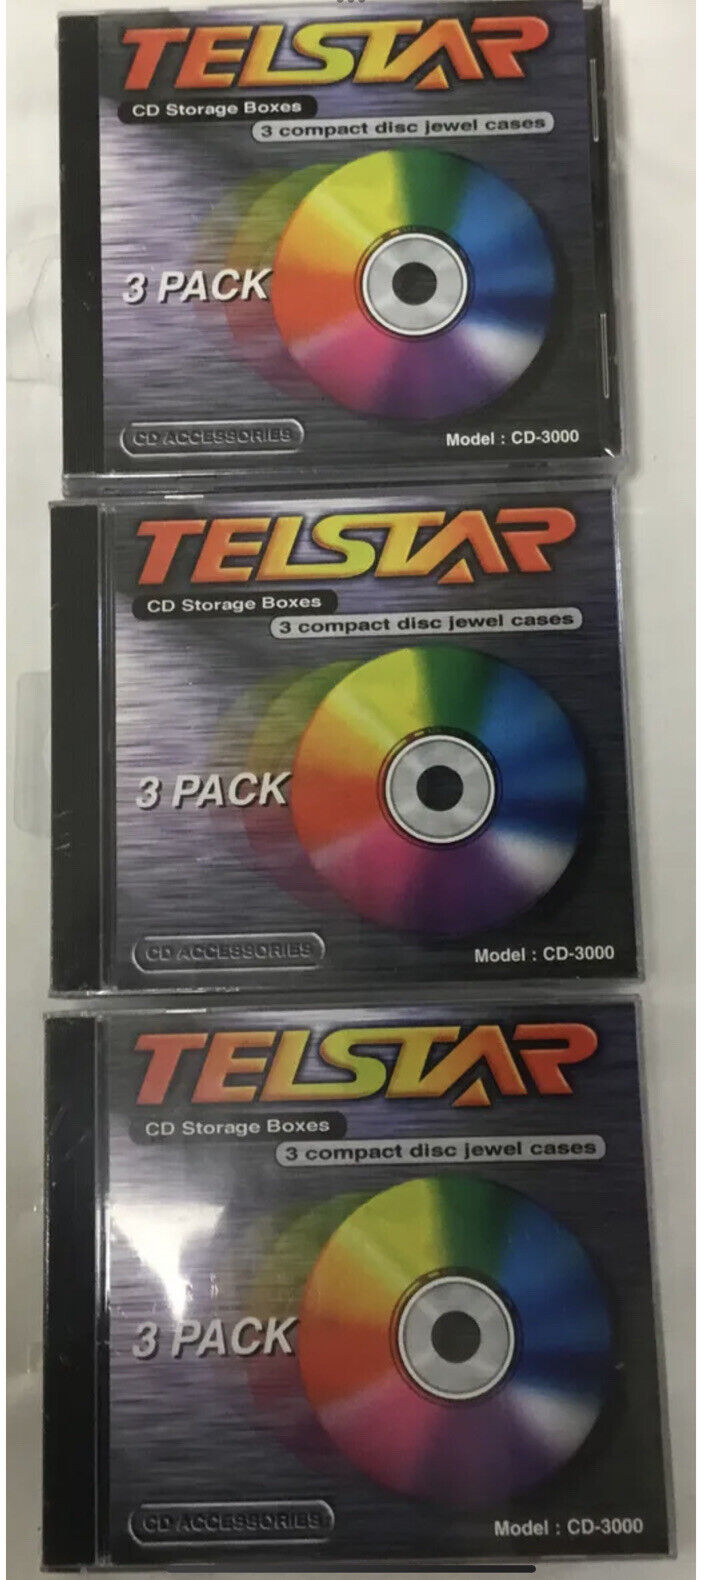 3 - 3 Packs TELSTAR Compact Disc Jewel Cases New Factory Sealed